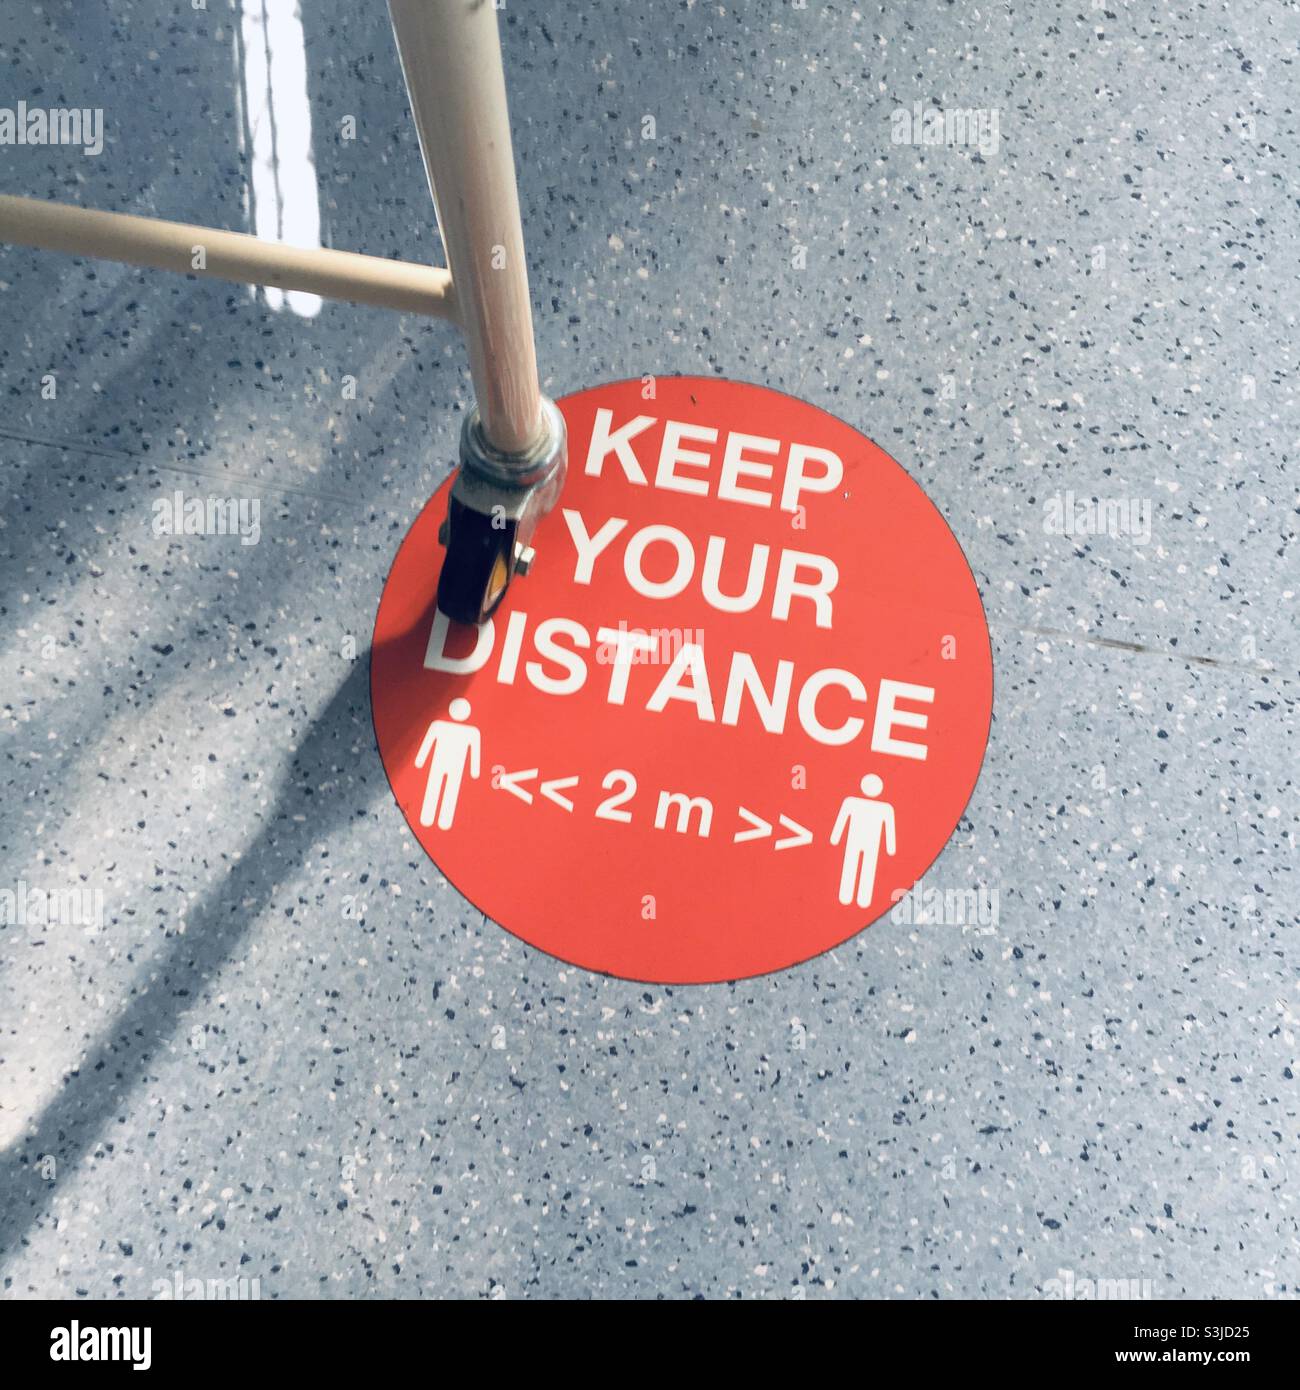 Keep your distance 2 metre covid safe distancing red floor sign Stock Photo